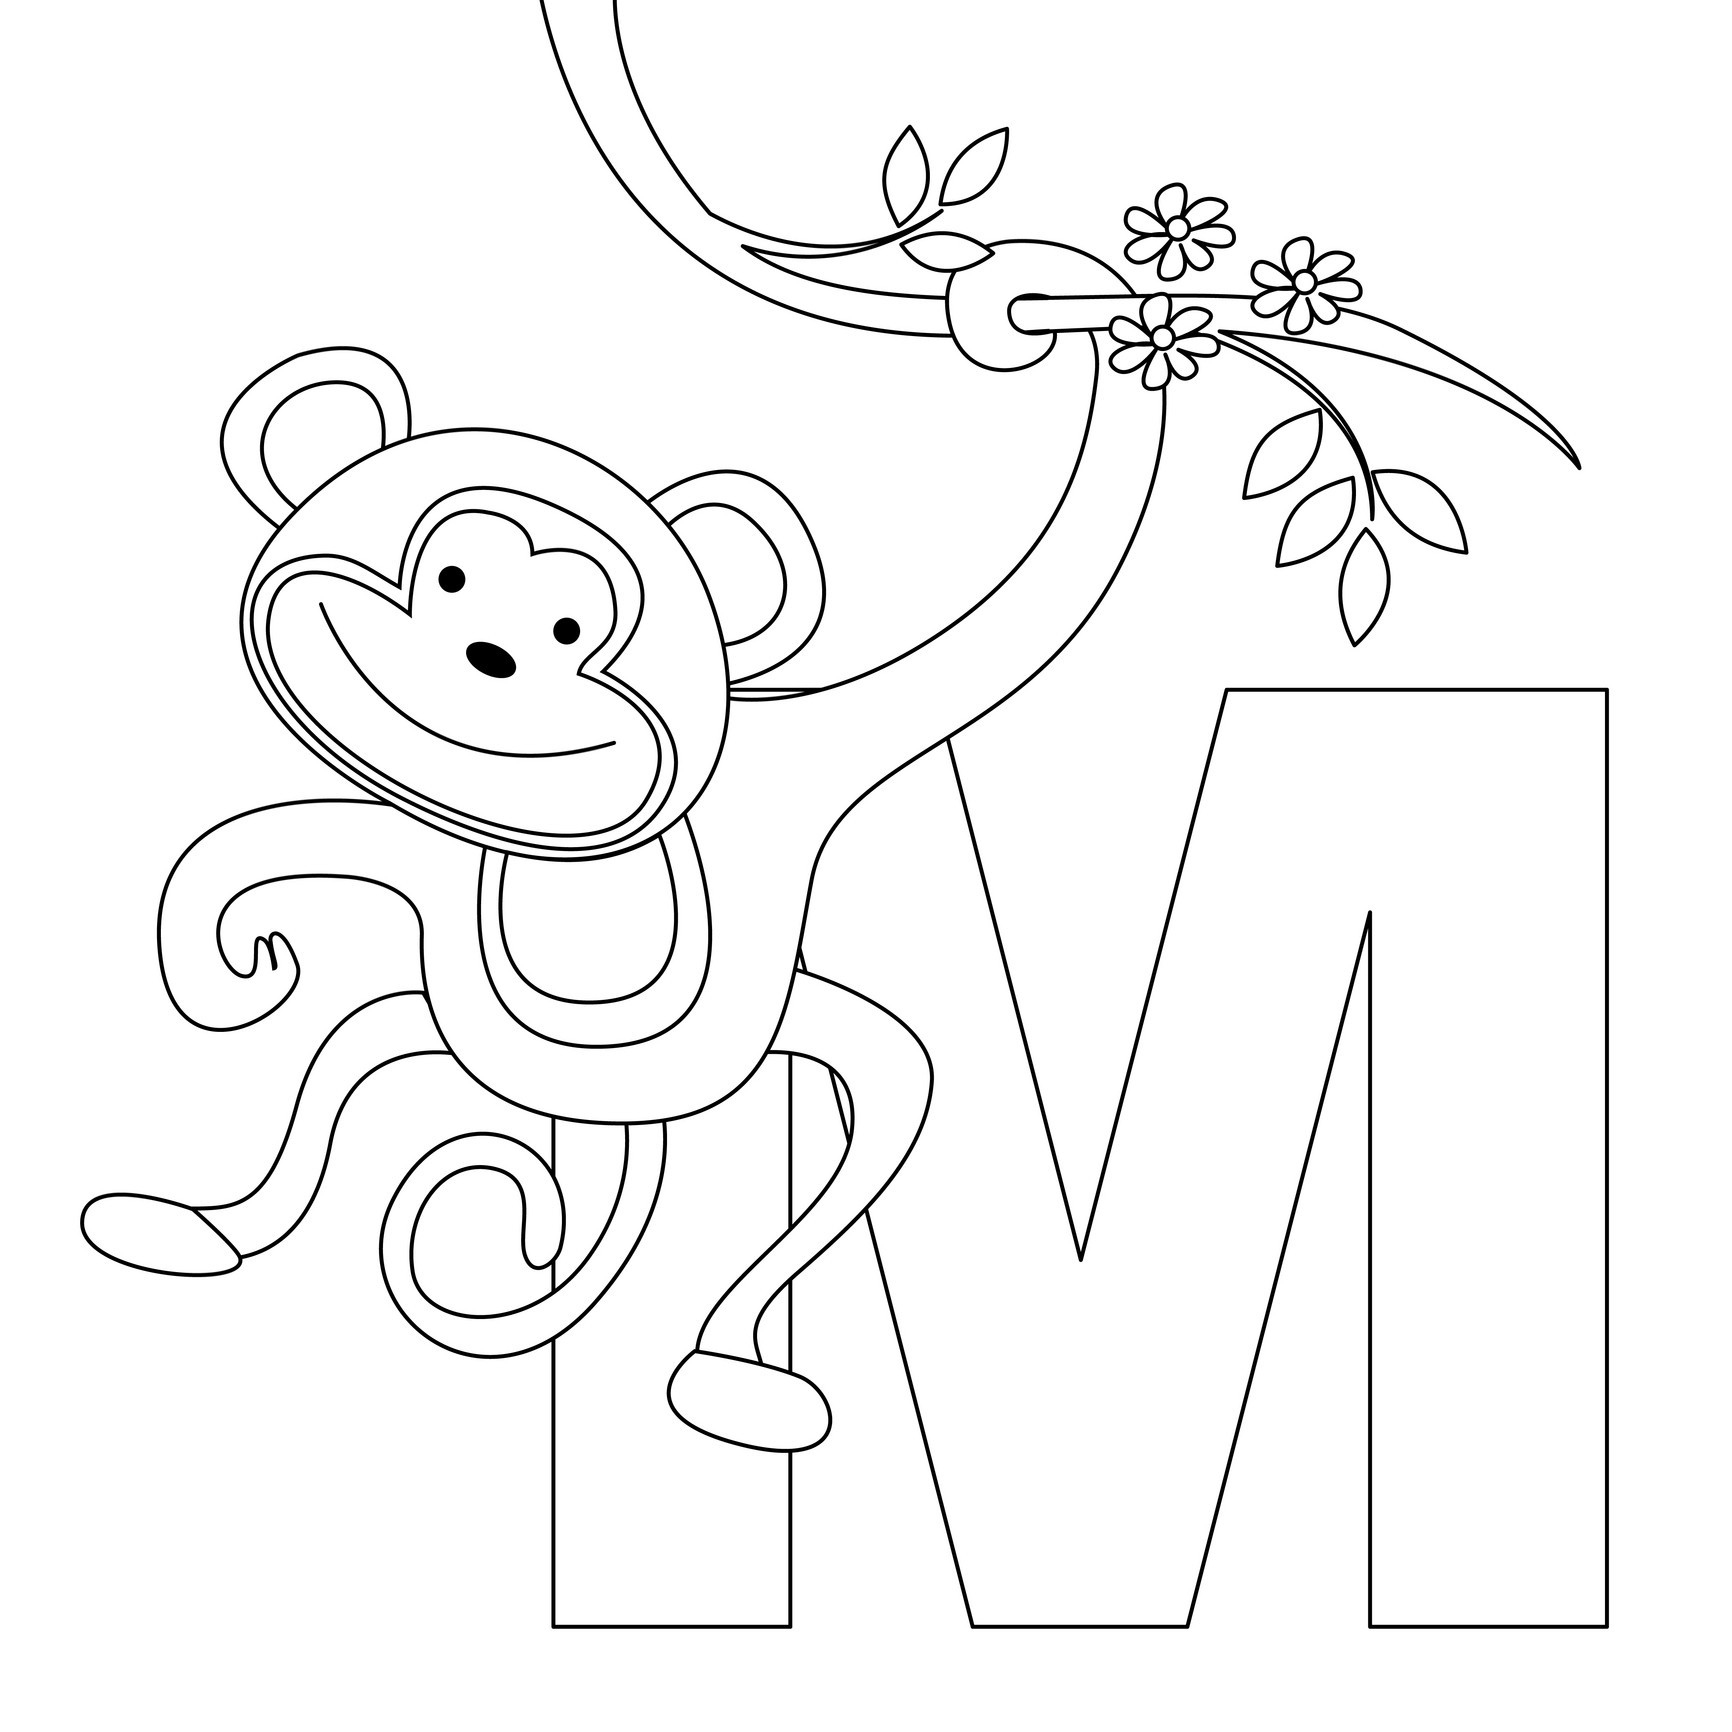 Free Printable Alphabet Coloring Pages for Kids - Best  